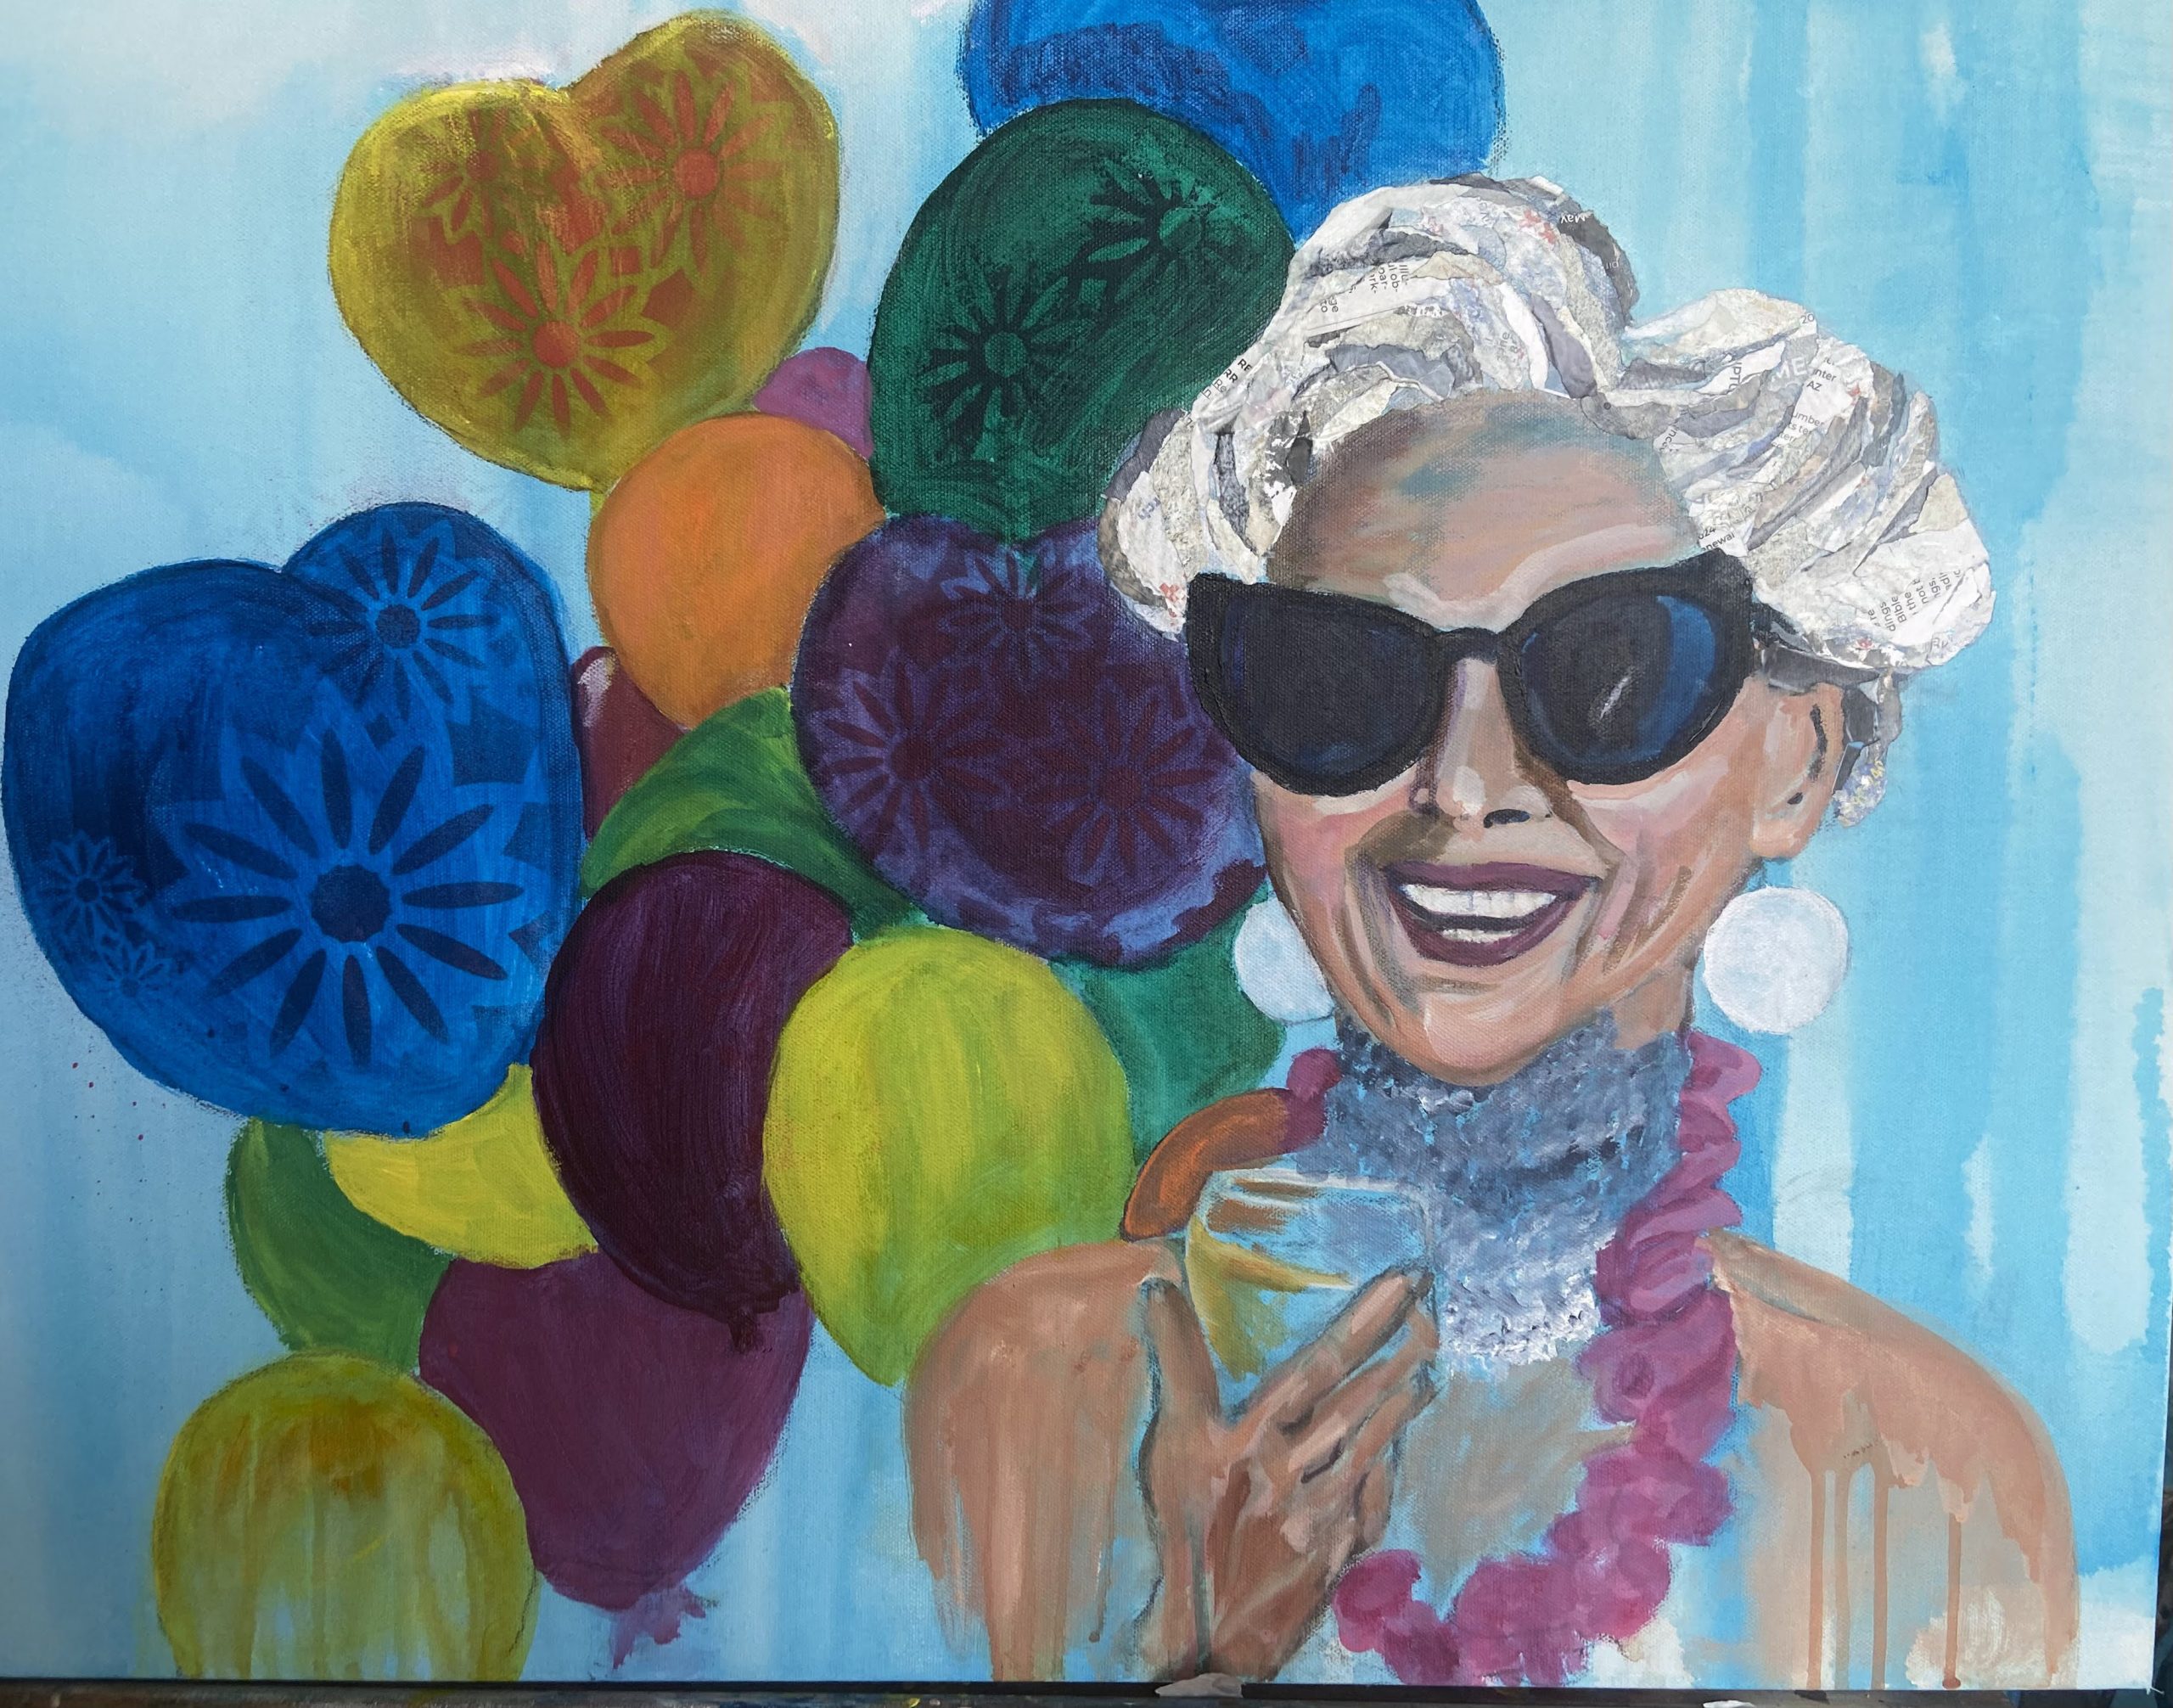 Painting of a happy senior lady smiling and holding a glass of wine against a backdrop of balloons.